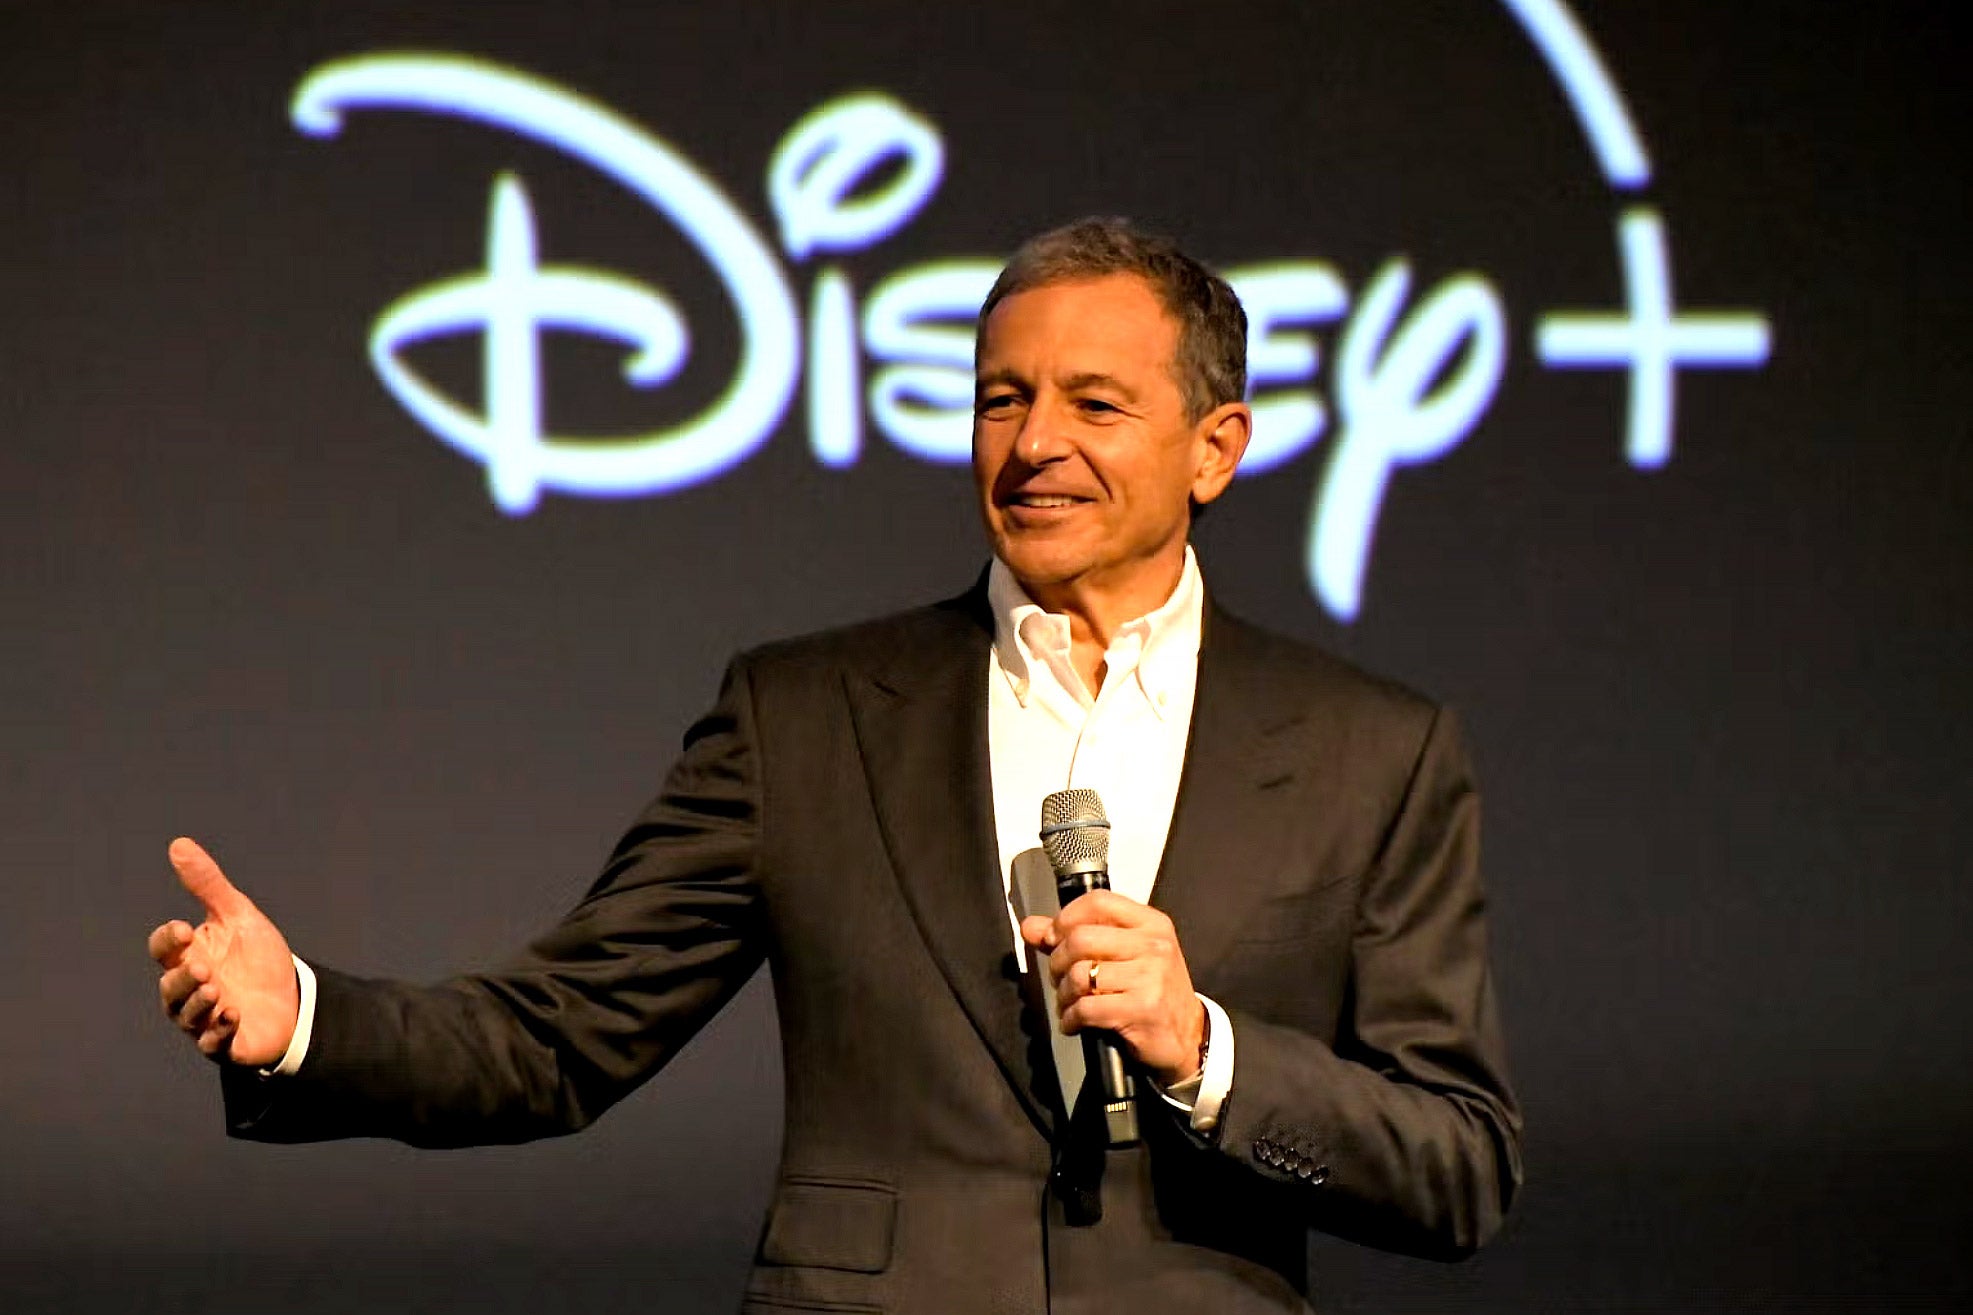 A middle-aged white man in a suit smiles and holds a microphone onstage in front of a backdrop that says "Disney."